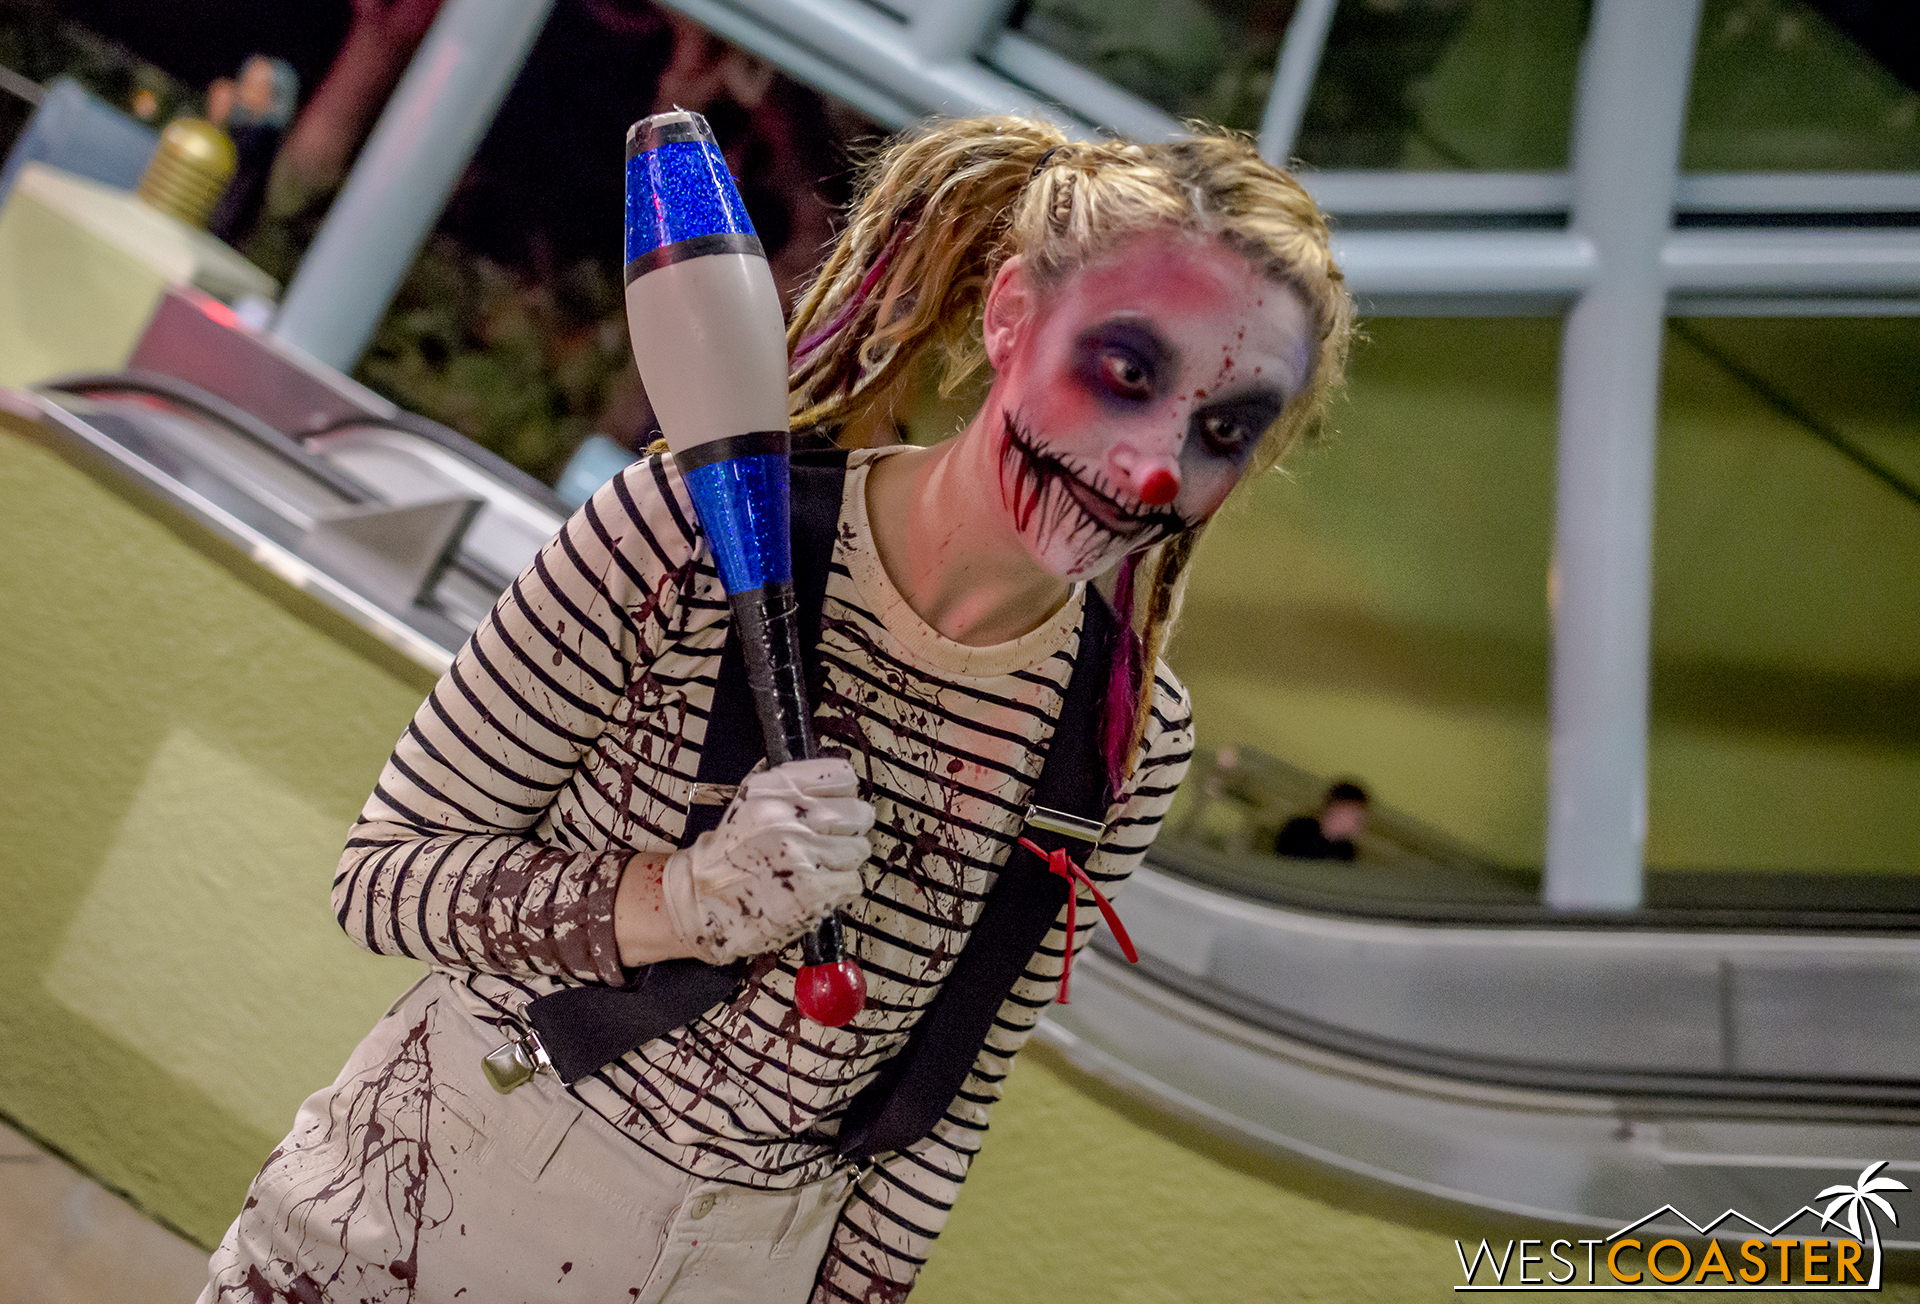  Guests coming down the escalator and getting into the Terror Tram line are greeted by roaming clowns as a taste for what's to come.   